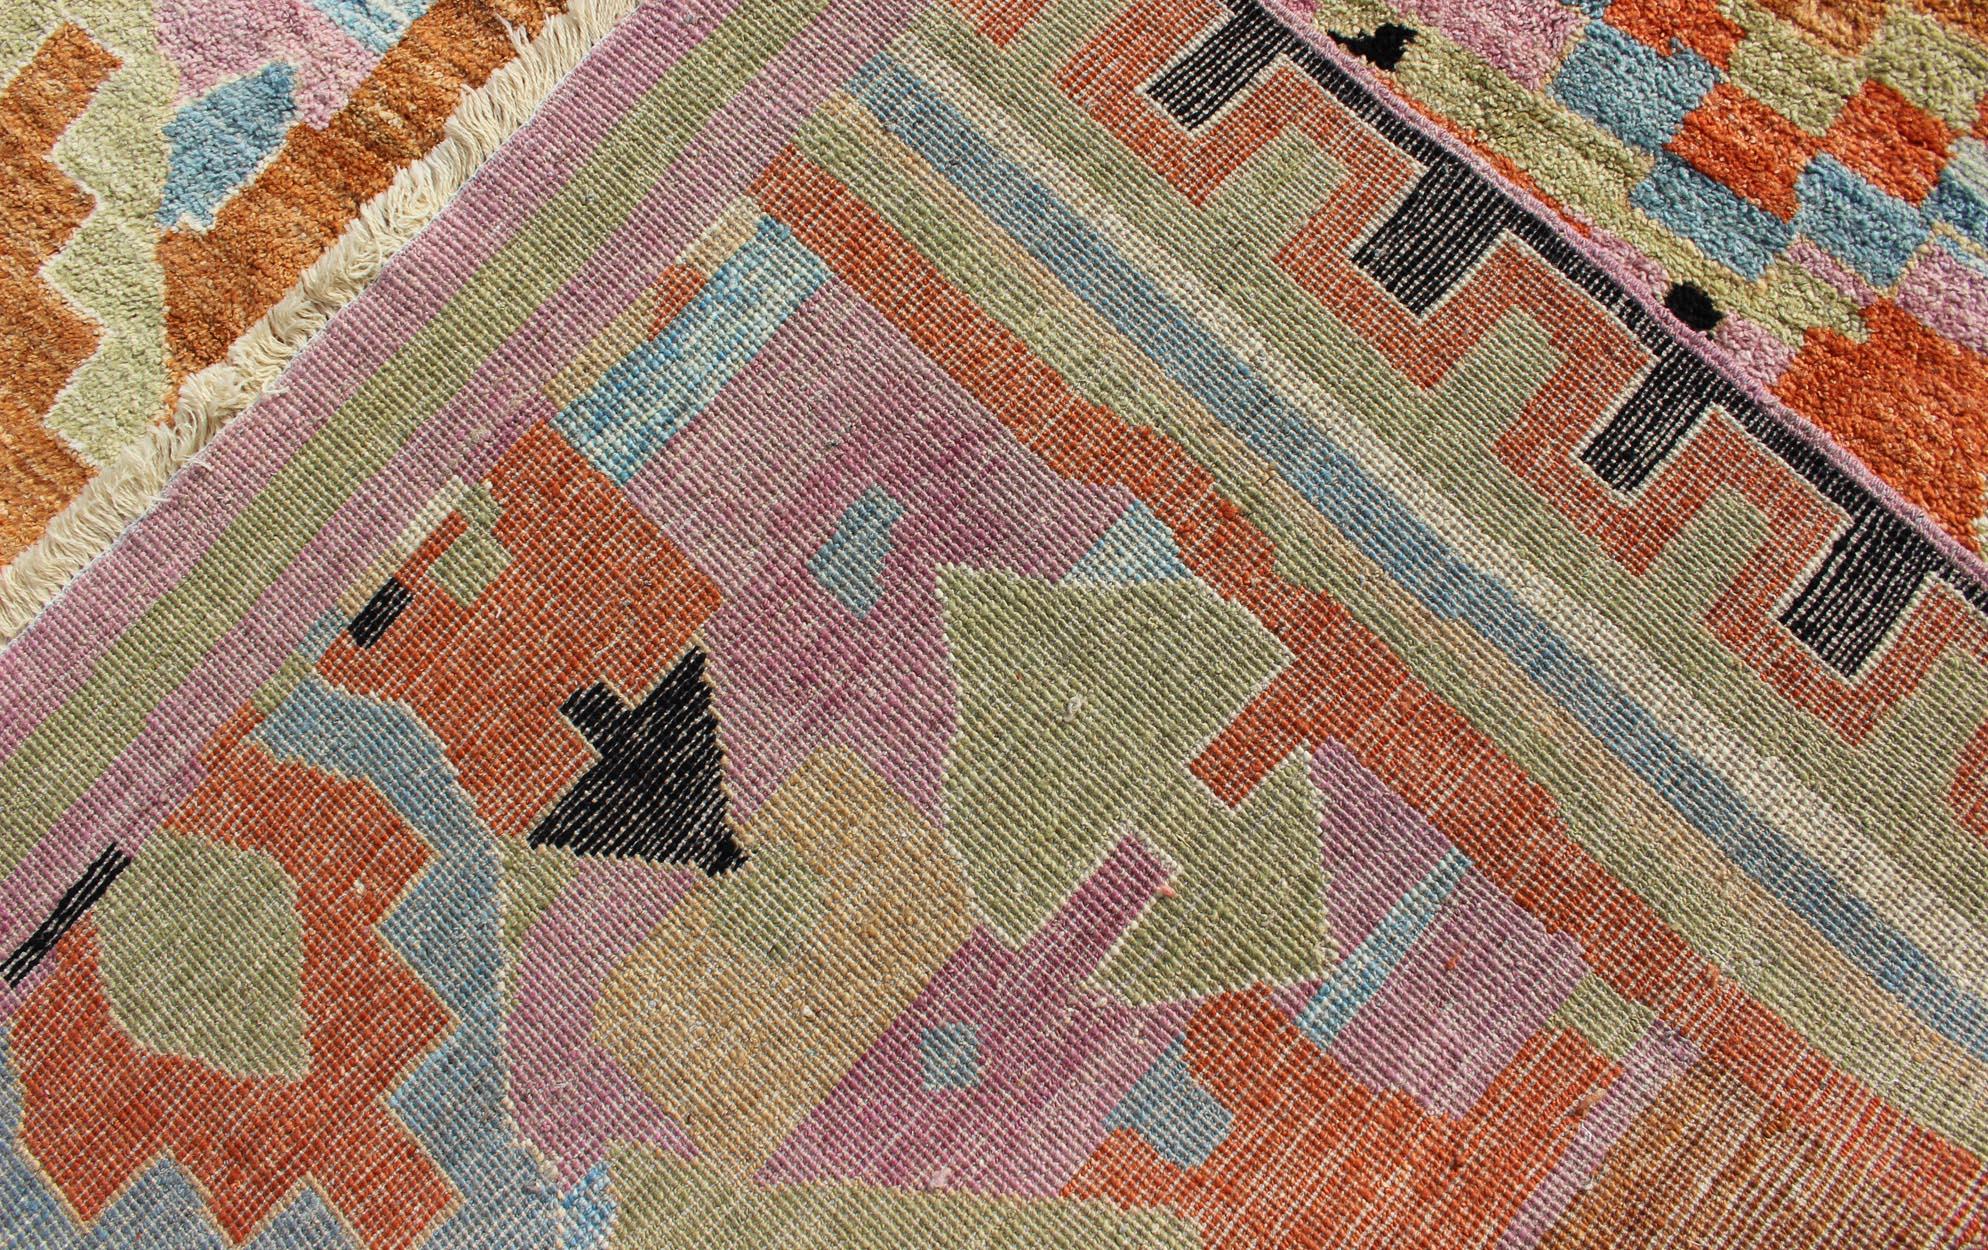 Modern Design Colorful Rug with Tribal and Geometric Motifs in Multi Colors 5